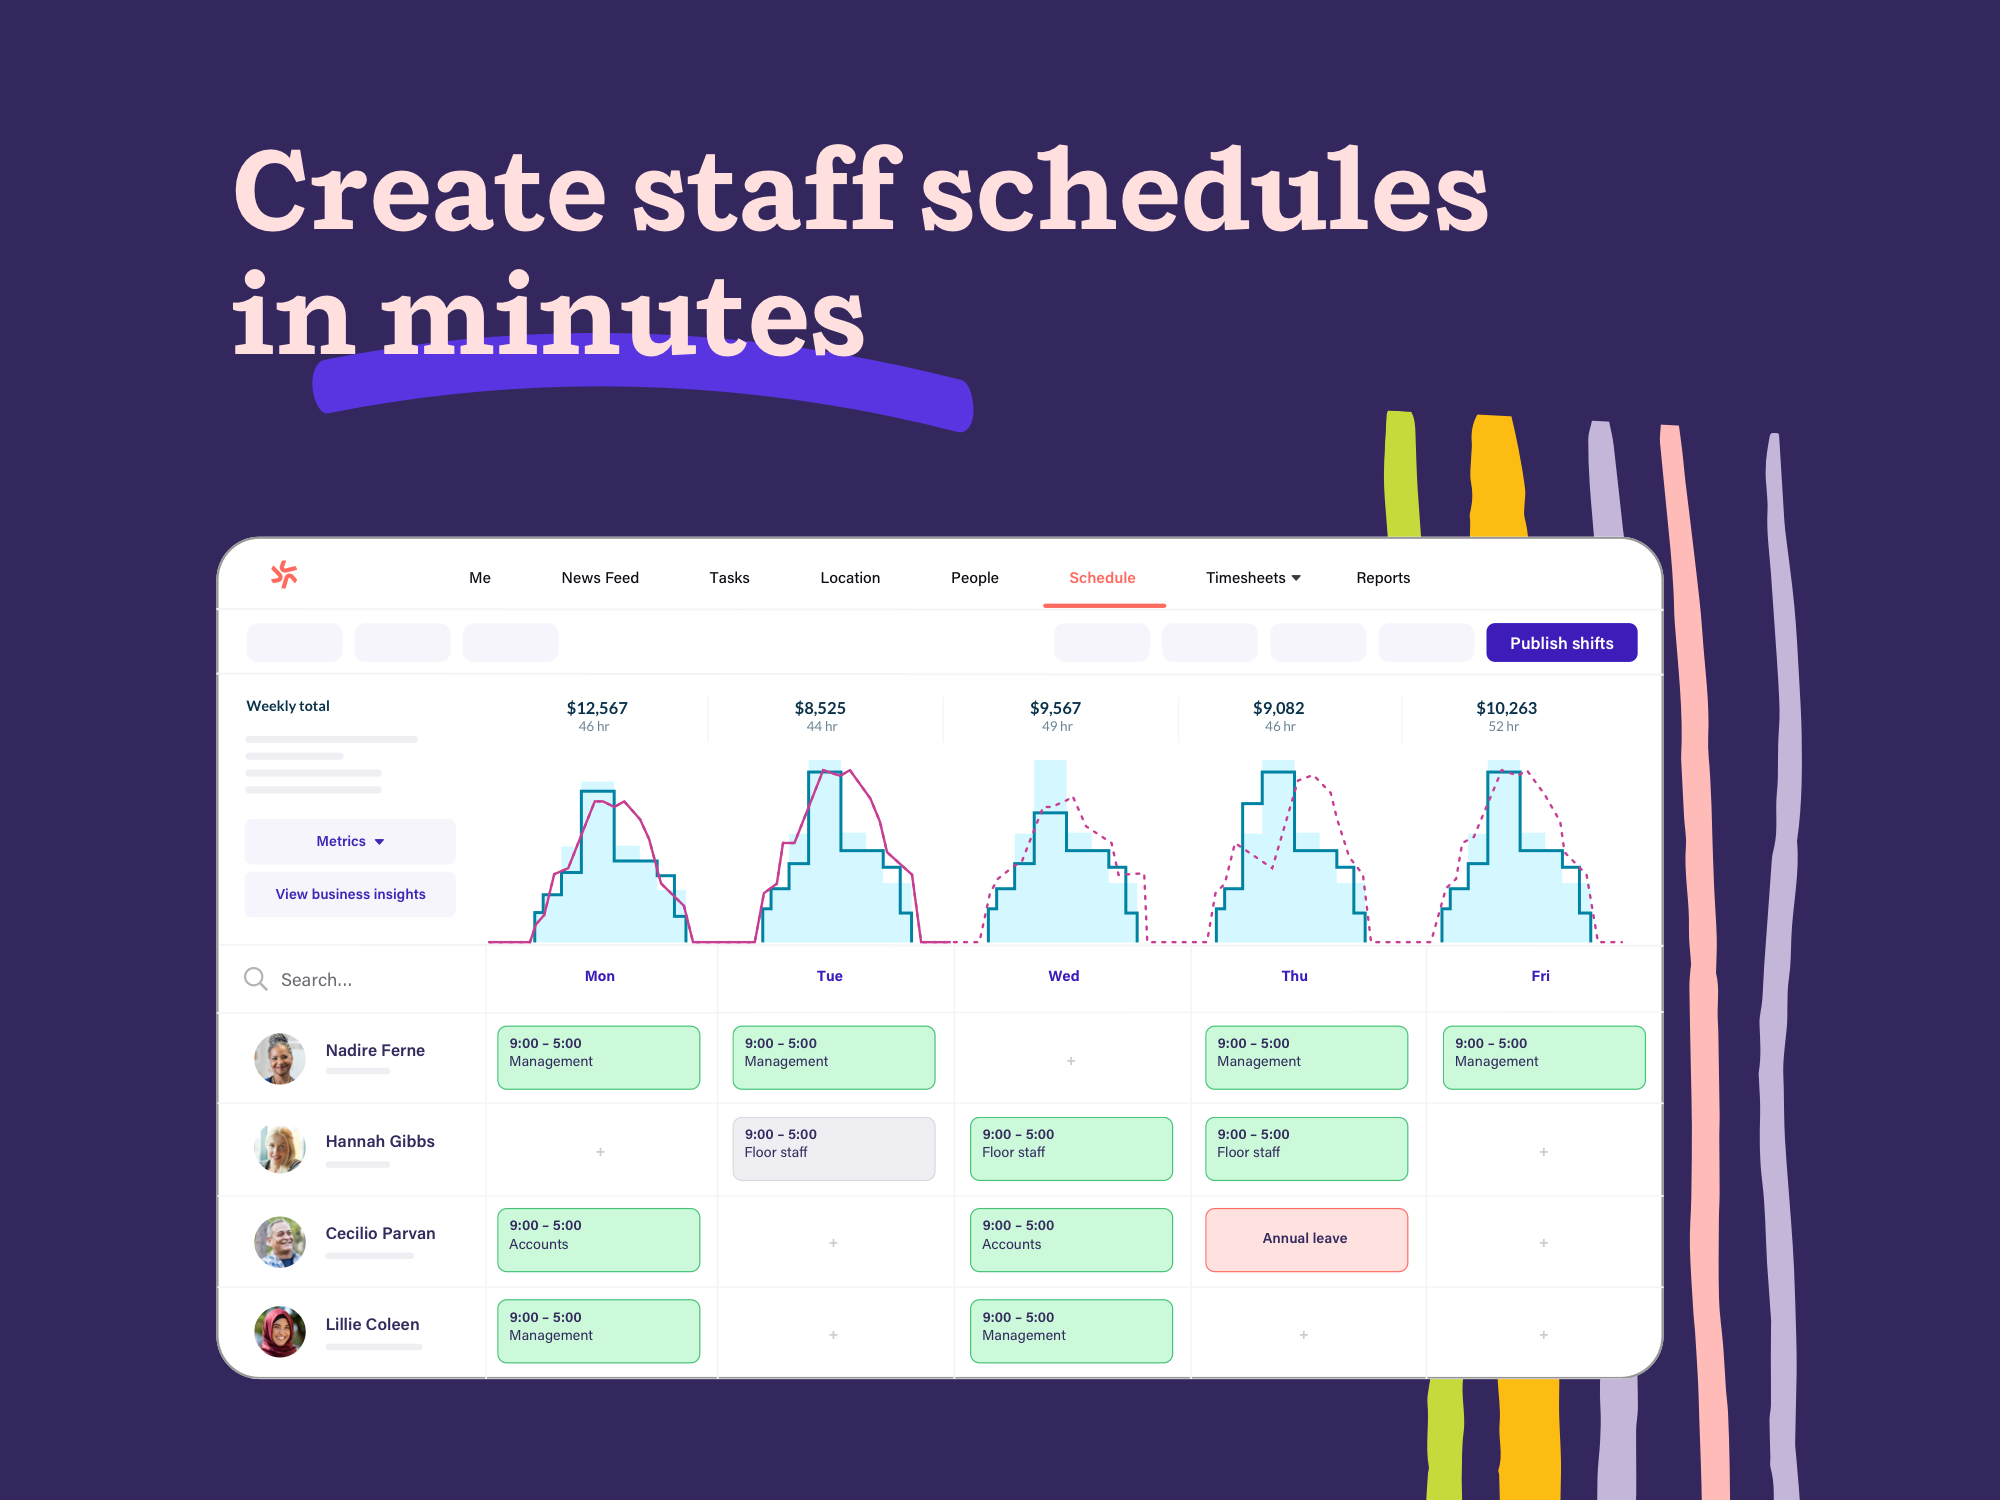 Deputy Software - Create new shift structures instantly, drag & drop existing schedules, or use auto-scheduling to create optimized, legally compliant schedules with a single click. 
Notify employees about their schedules and changes via email, SMS, or push notifications.